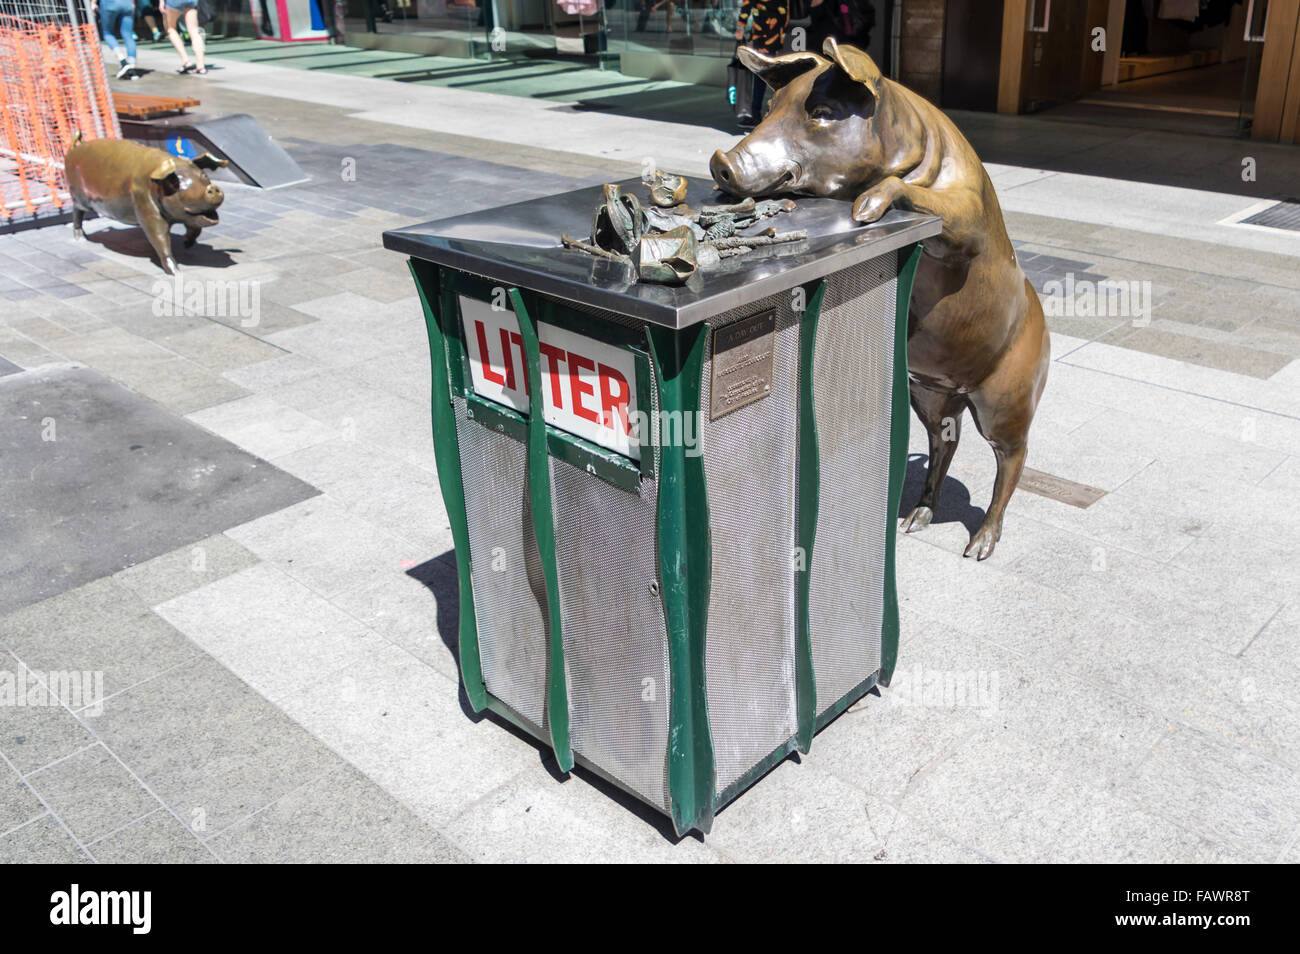 'A Day Out' by Marguerite Derricourt. Bronze sculpture of a pig eating from a litter bin at Rundle Mall, Adelaide, Australia. Stock Photo